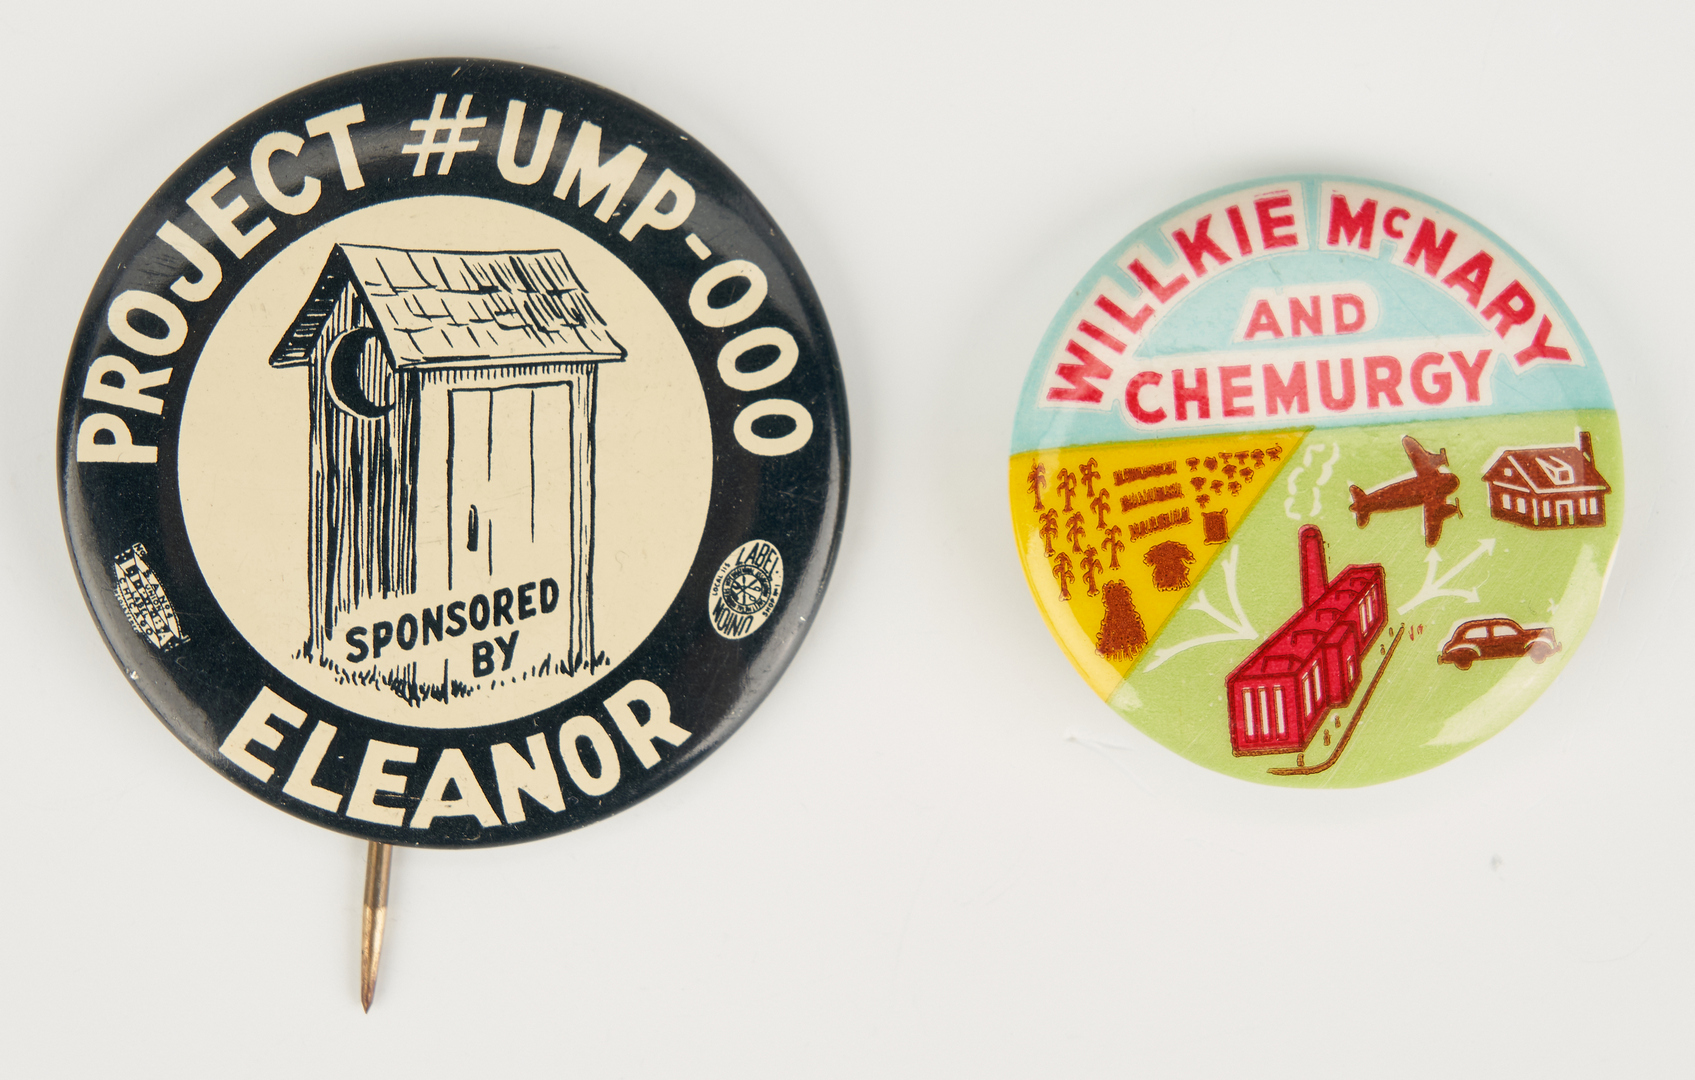 Lot 684: 5 Wendell Wilkie Buttons, incl. Willkie McNary and Chemurgy Button